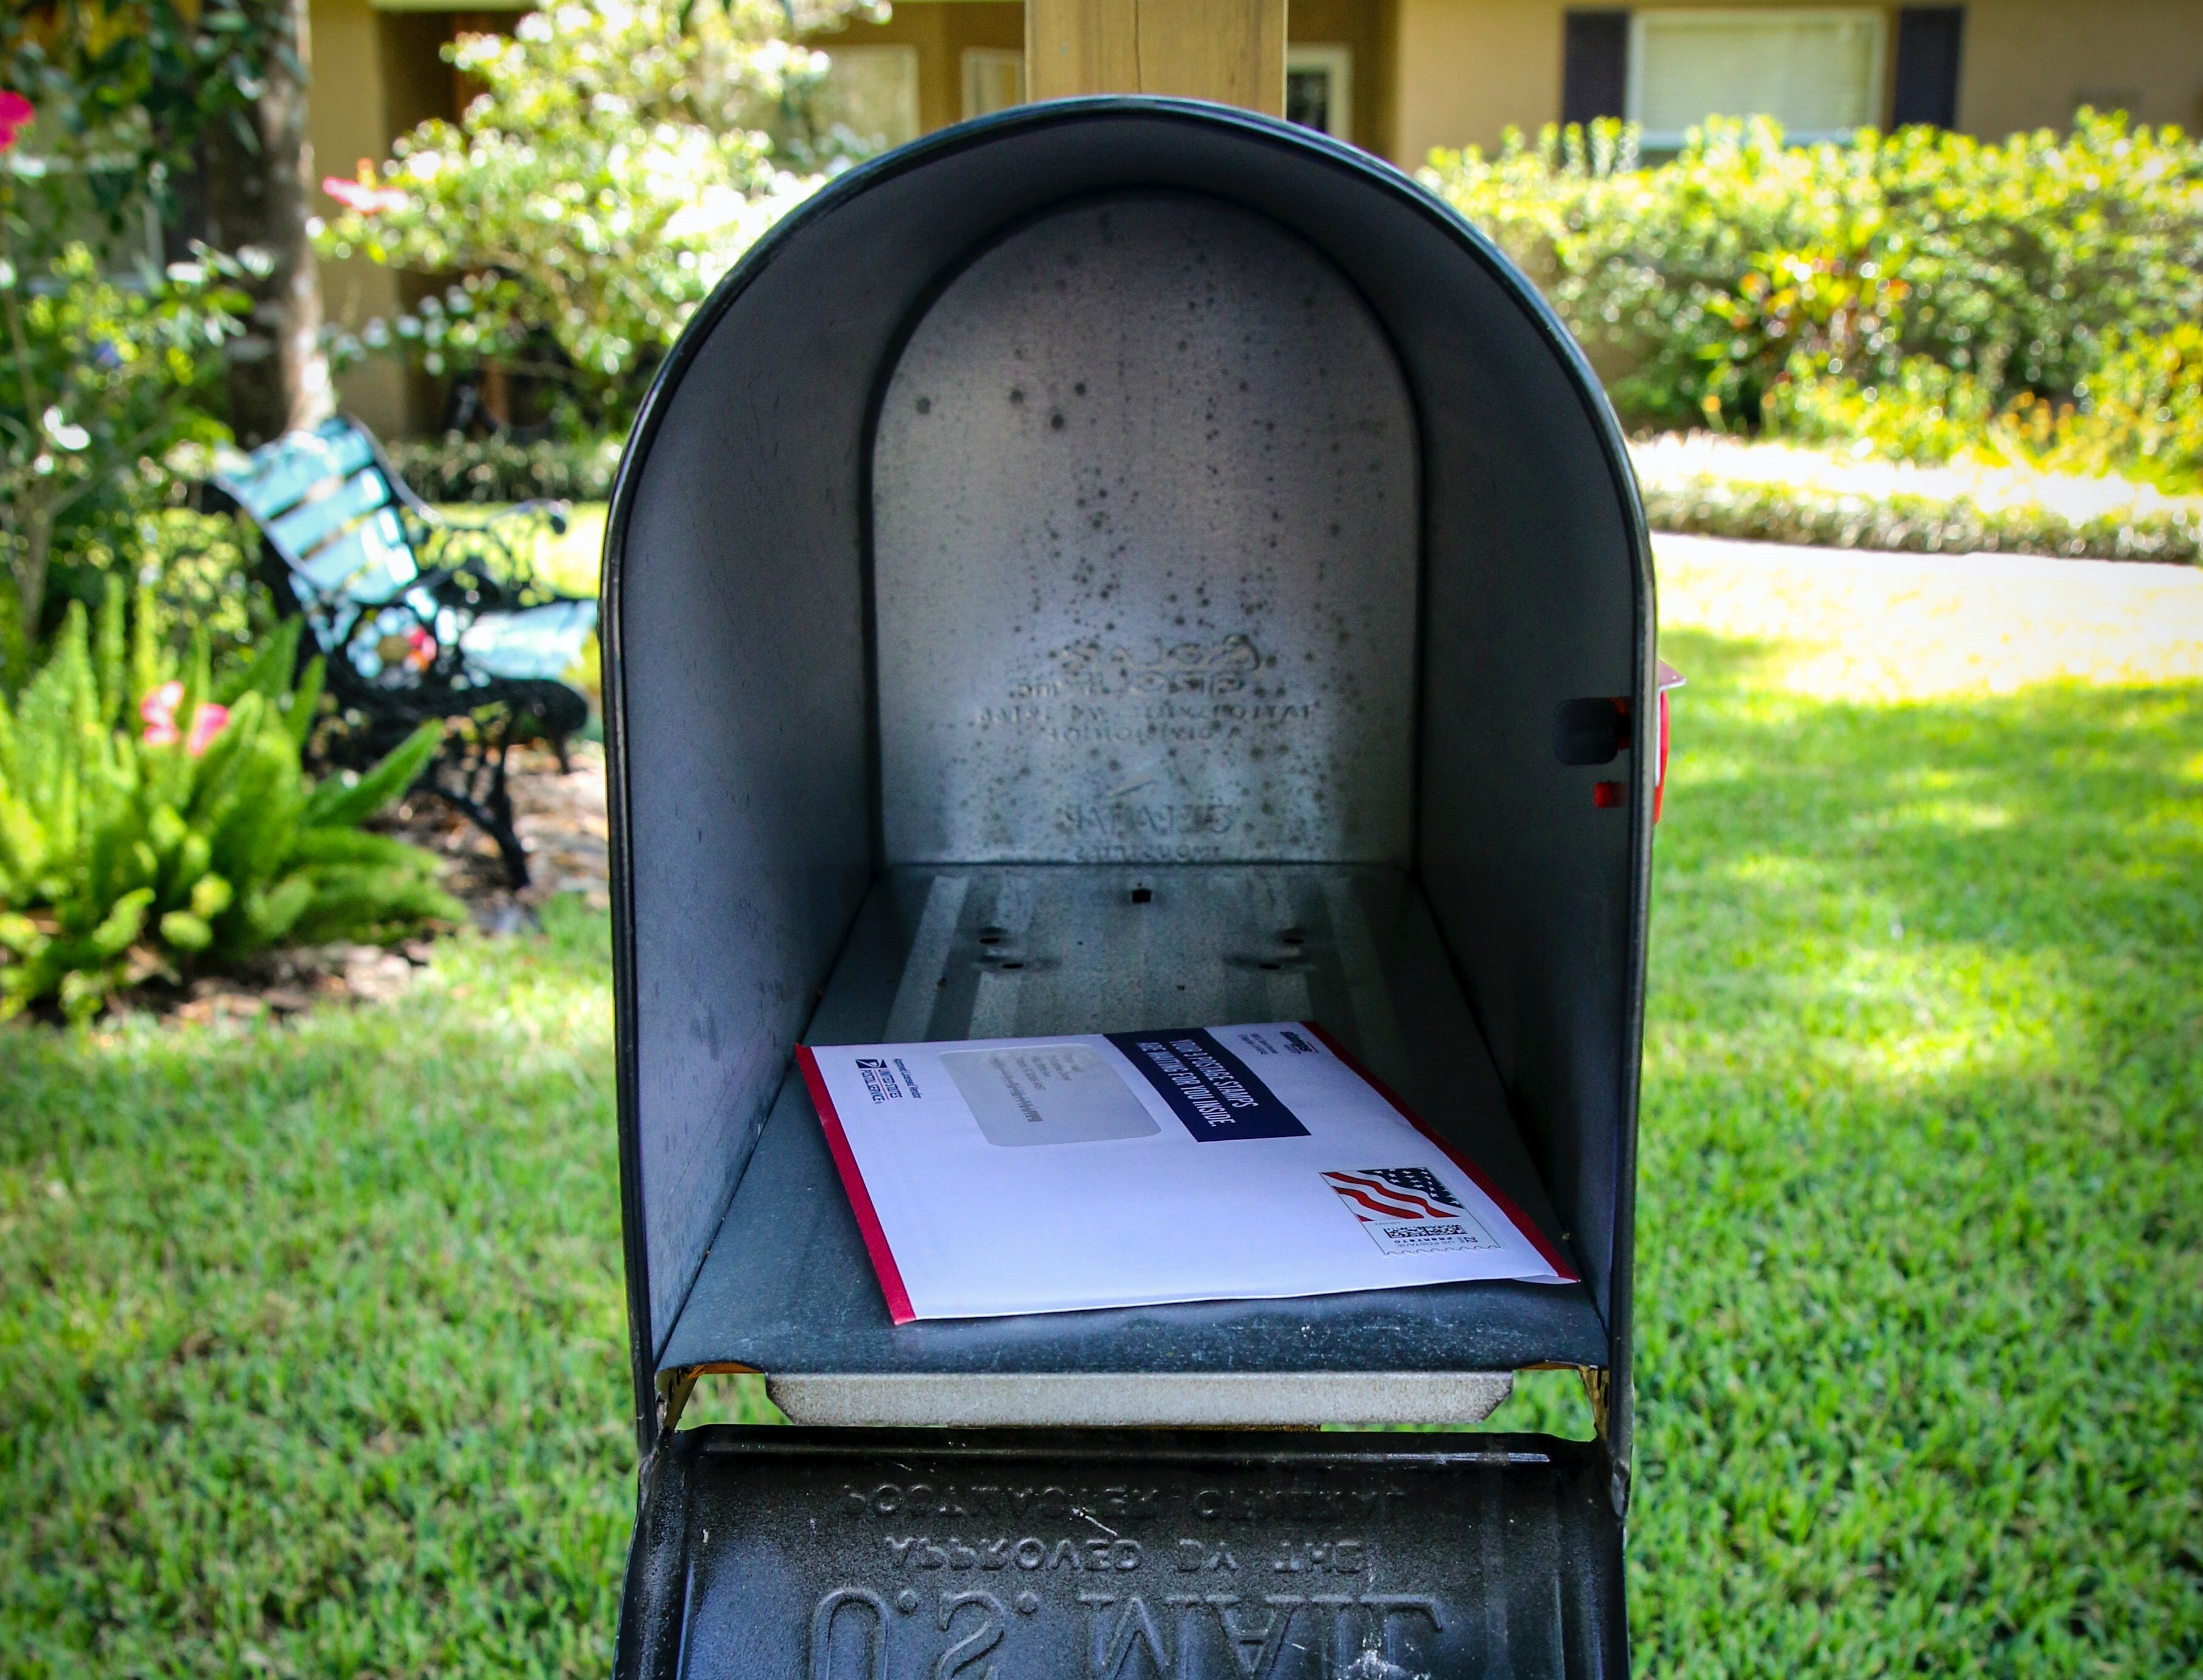 When Newman opened the mailbox, he found a letter addressed, "To Mommy in Heaven." | Source: Unsplash